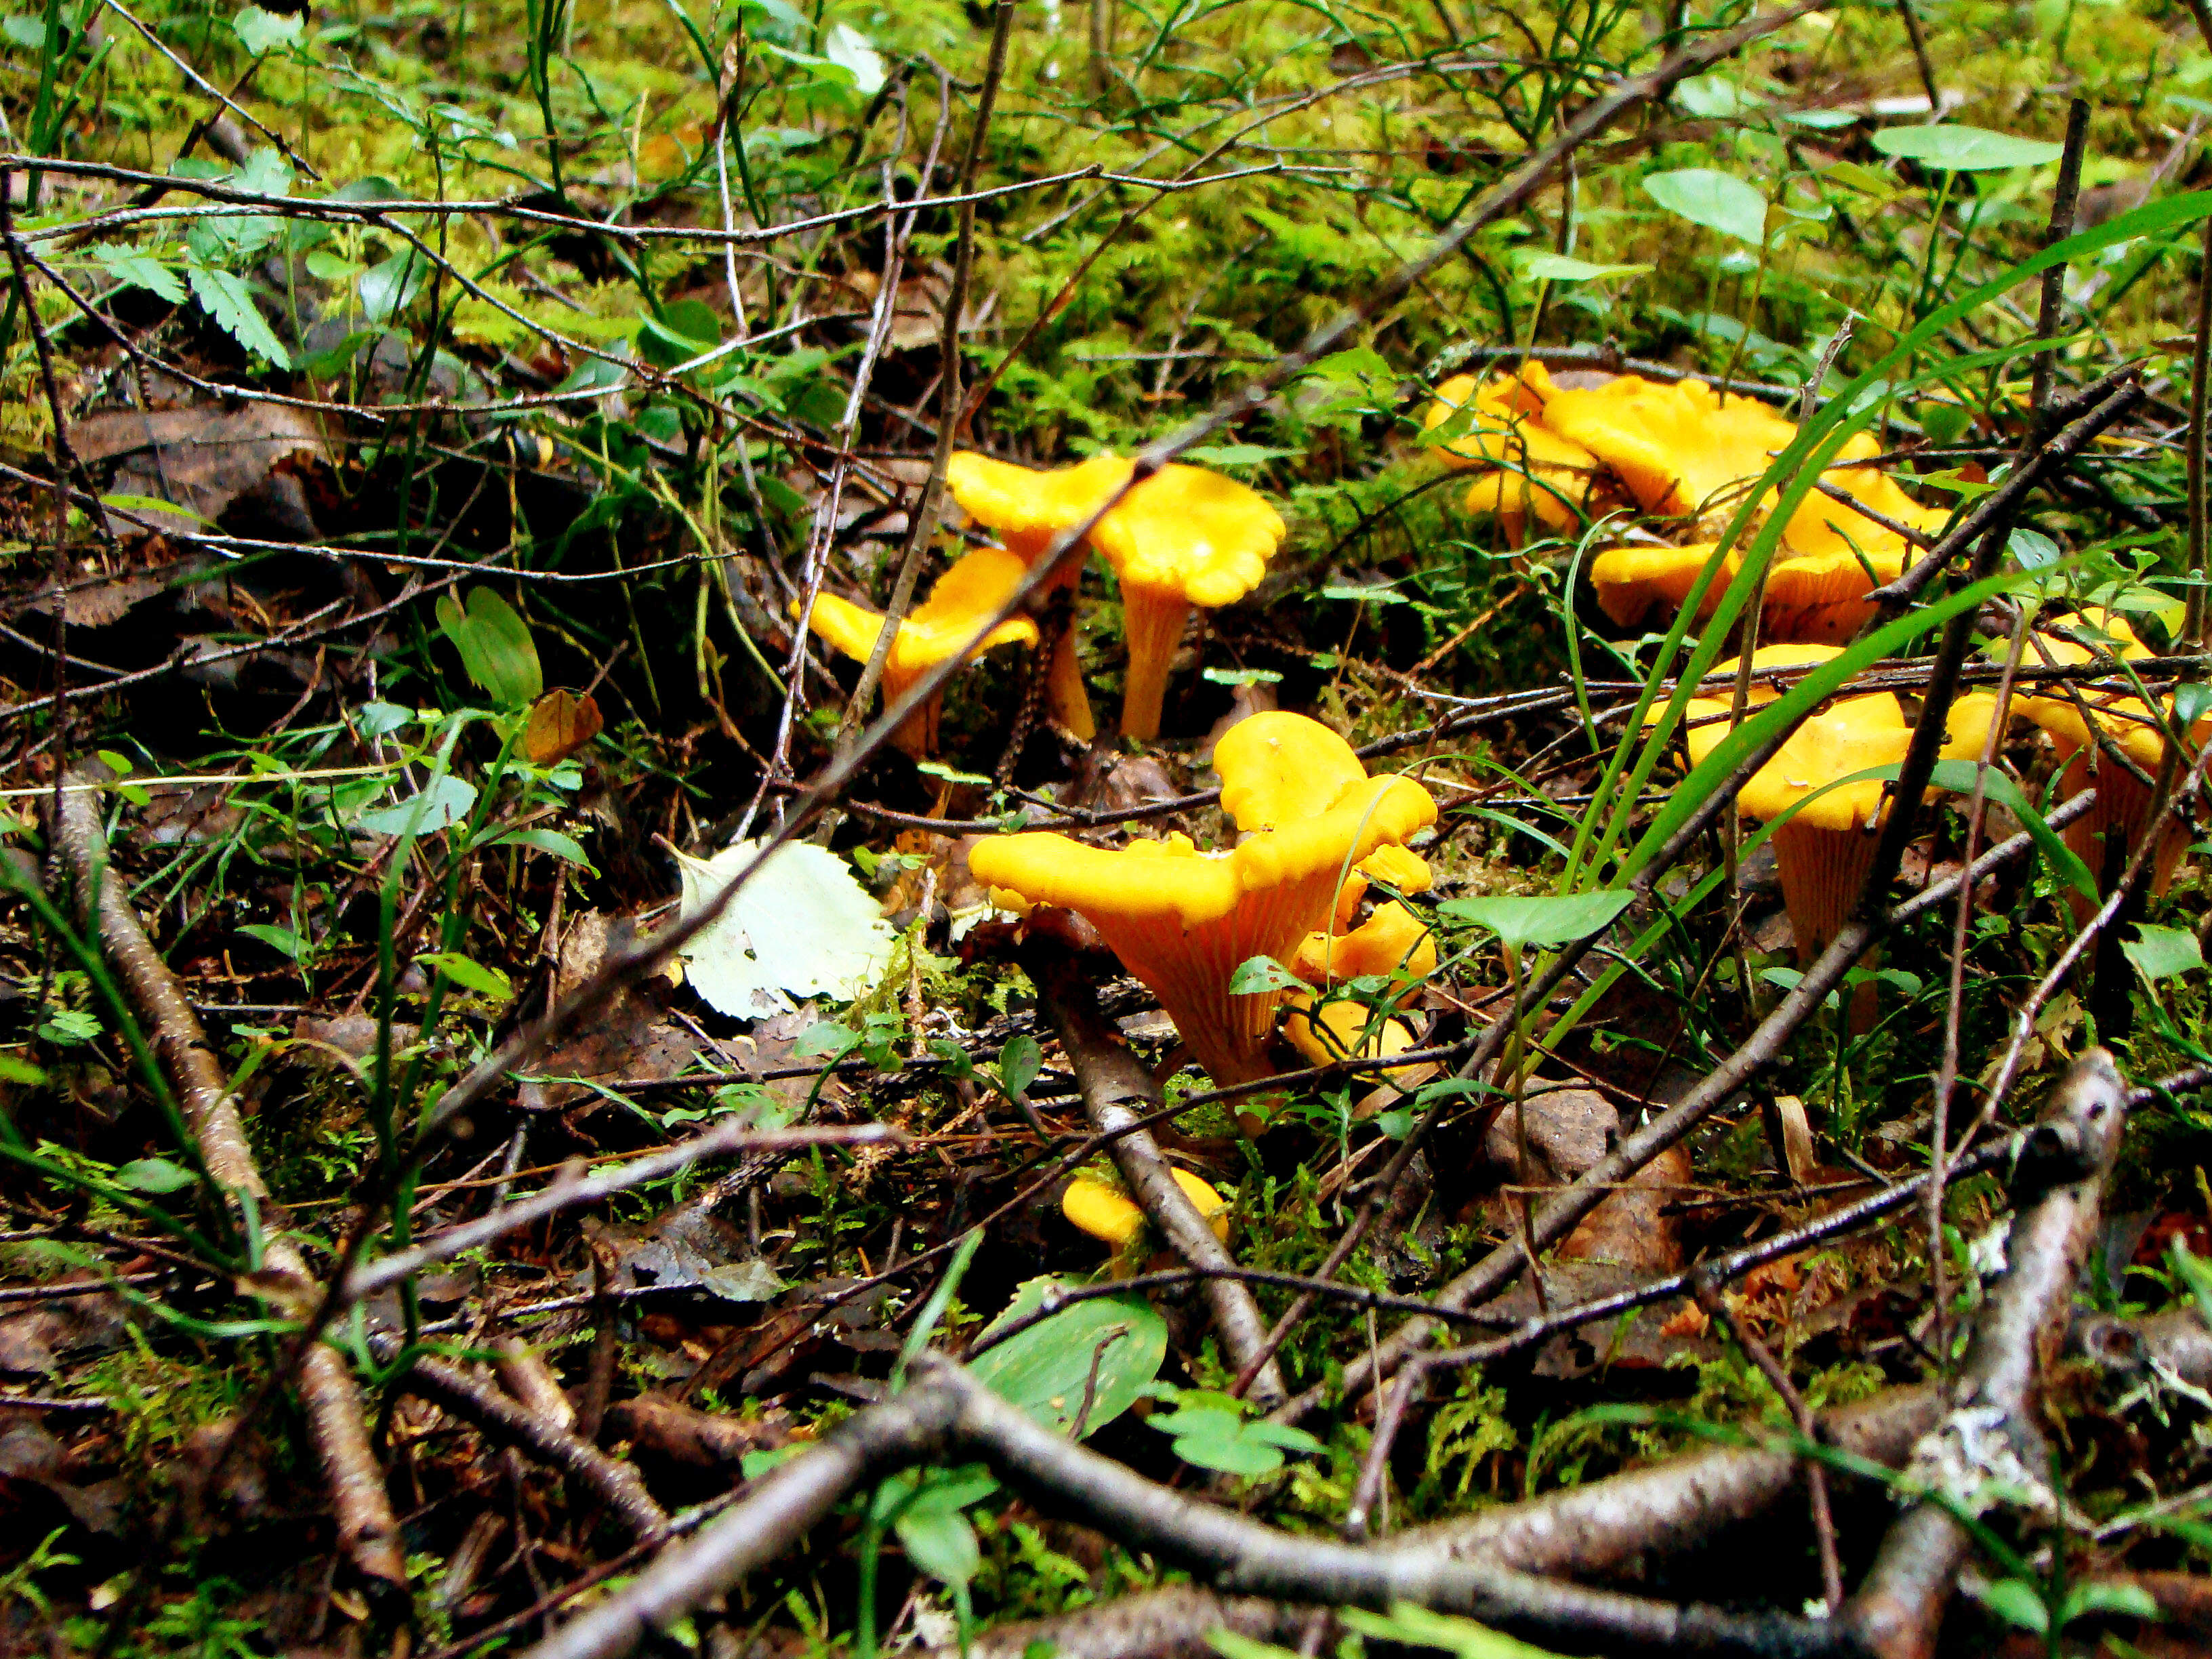 Hiking searching for chantarelles